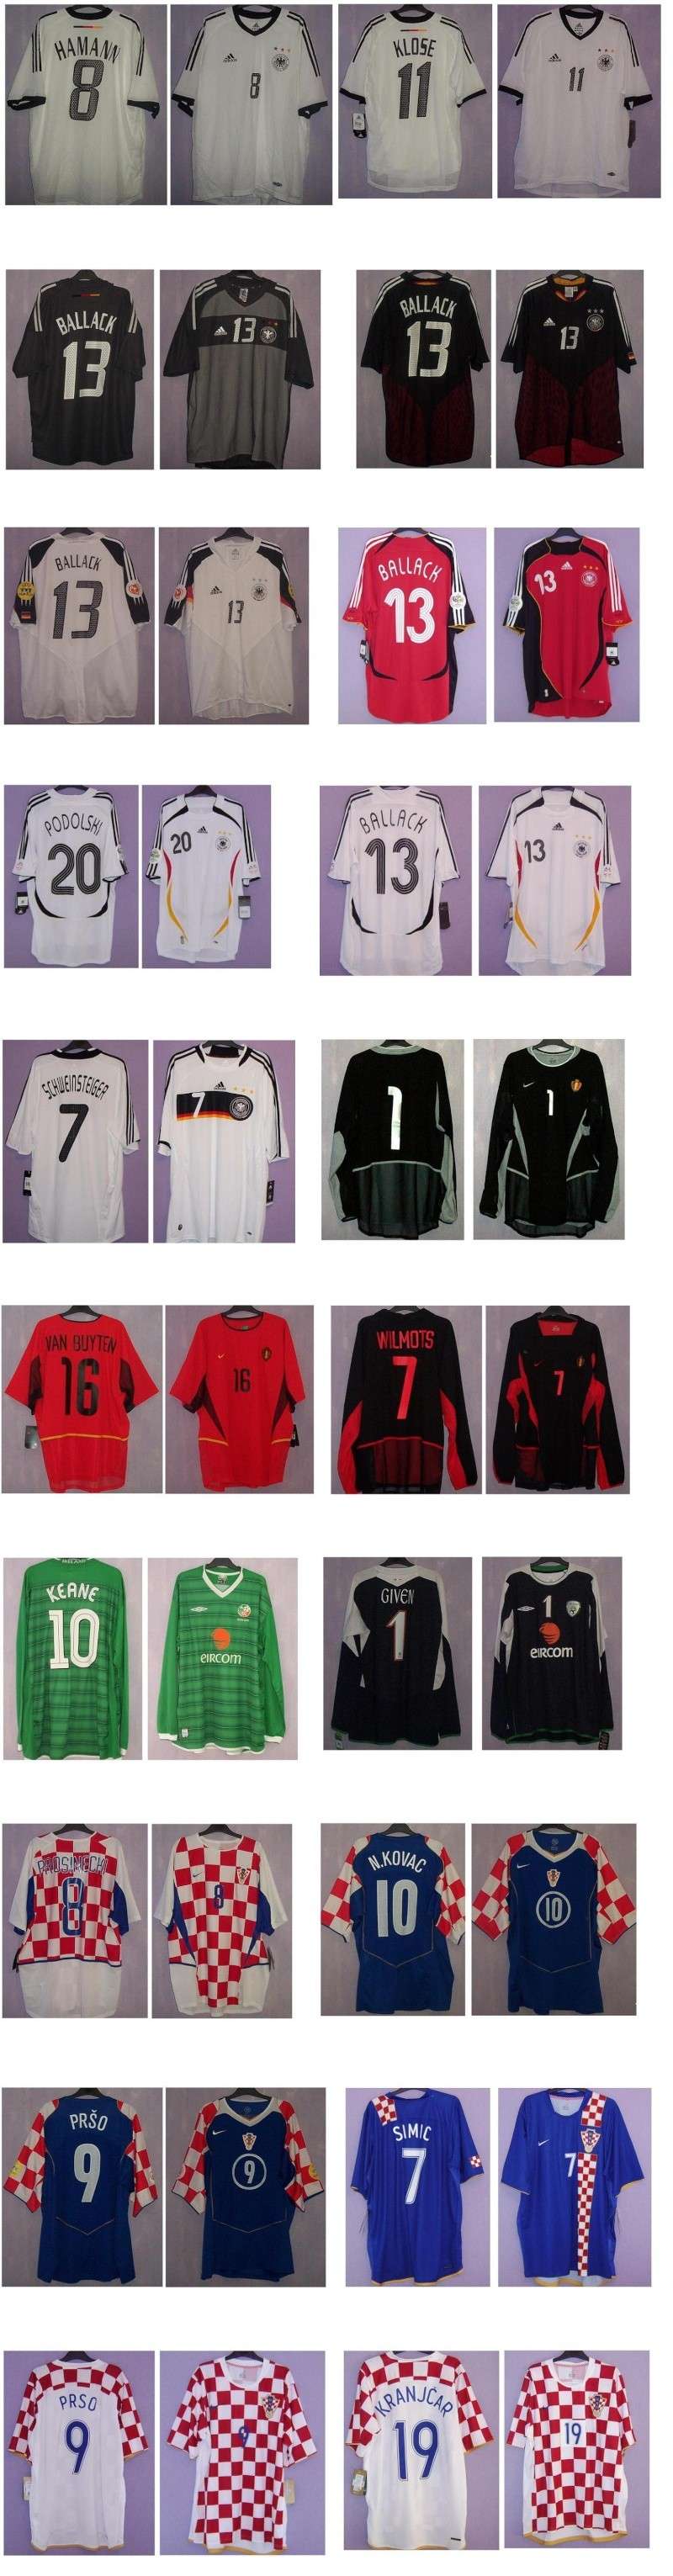 treble 1999 shirt collection - Page 3 Gerirc10